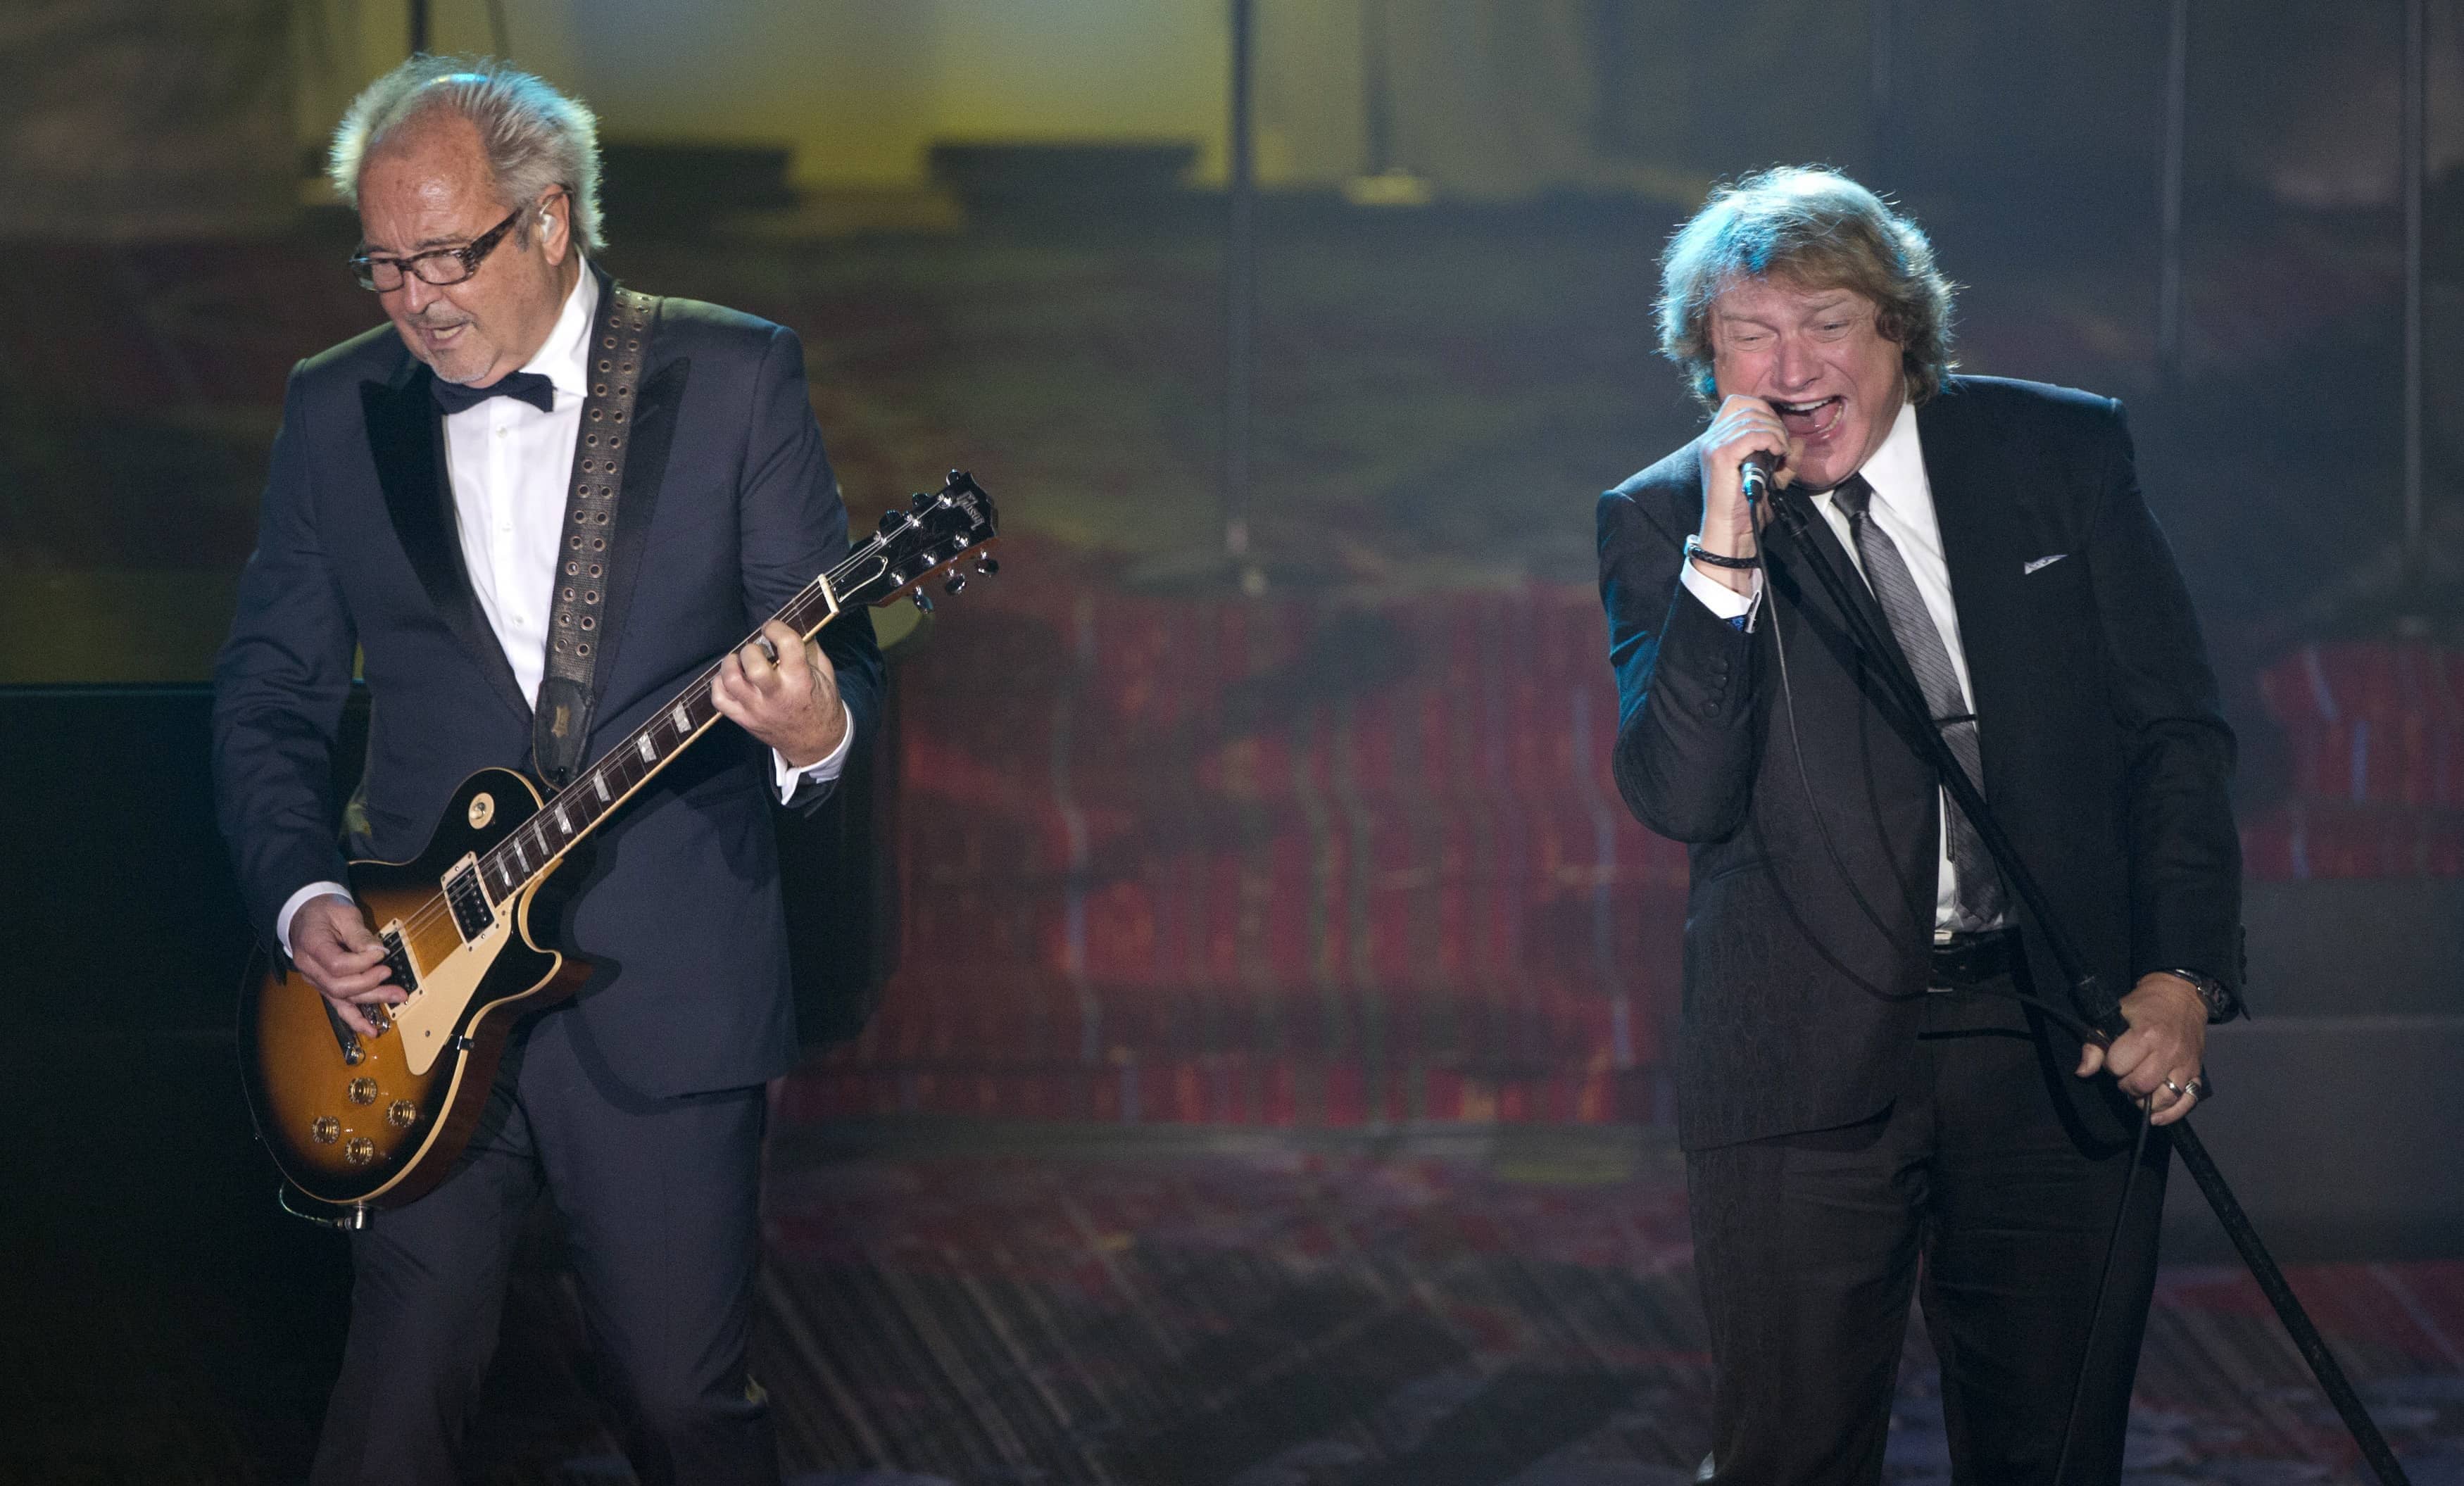 musicians-lou-gramm-and-mick-jones-of-foreigner-perform-during-the-44th-annual-songwriters-hall-of-fame-ceremony-in-new-york